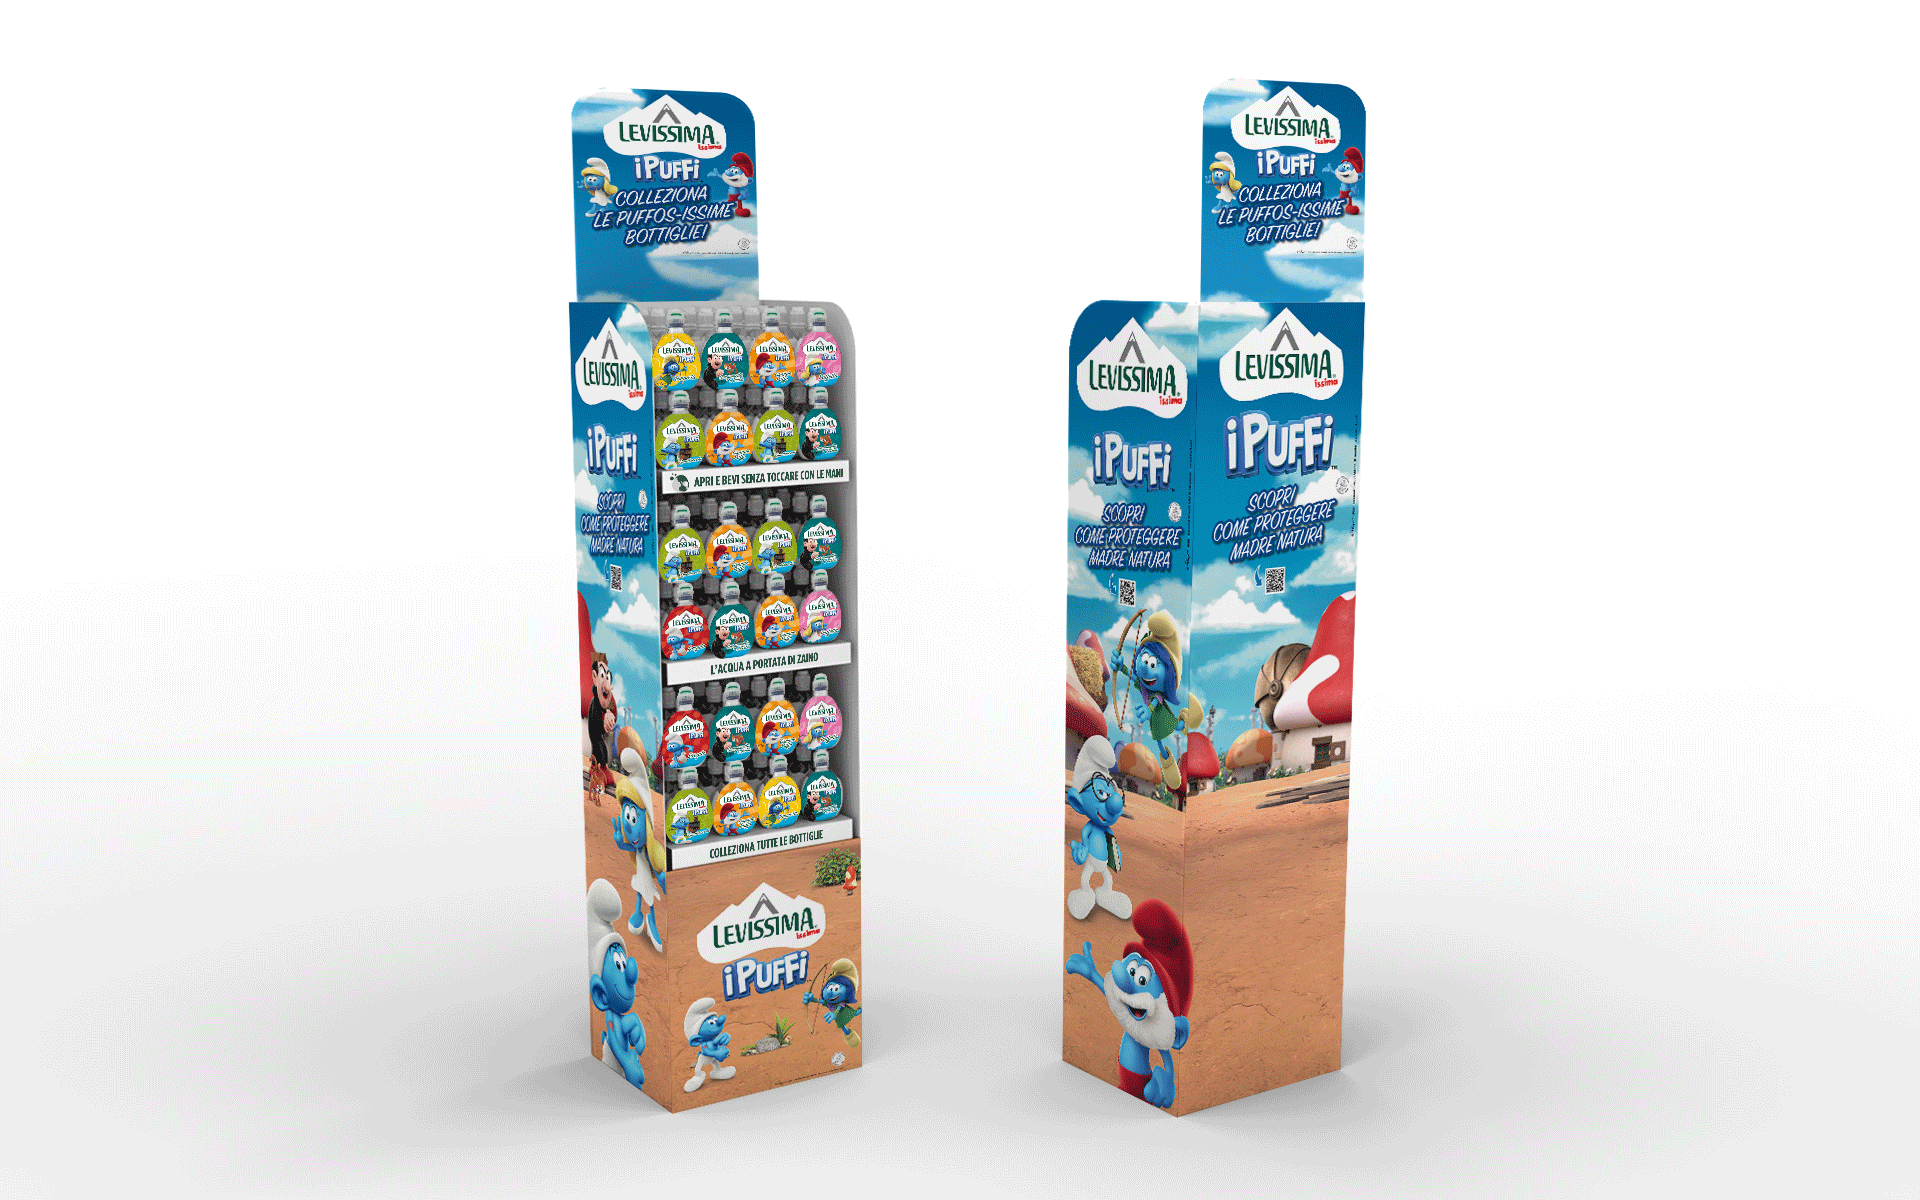 The 3D totem and the standing display unit by ATC for Issima The Smurfs in-store communication